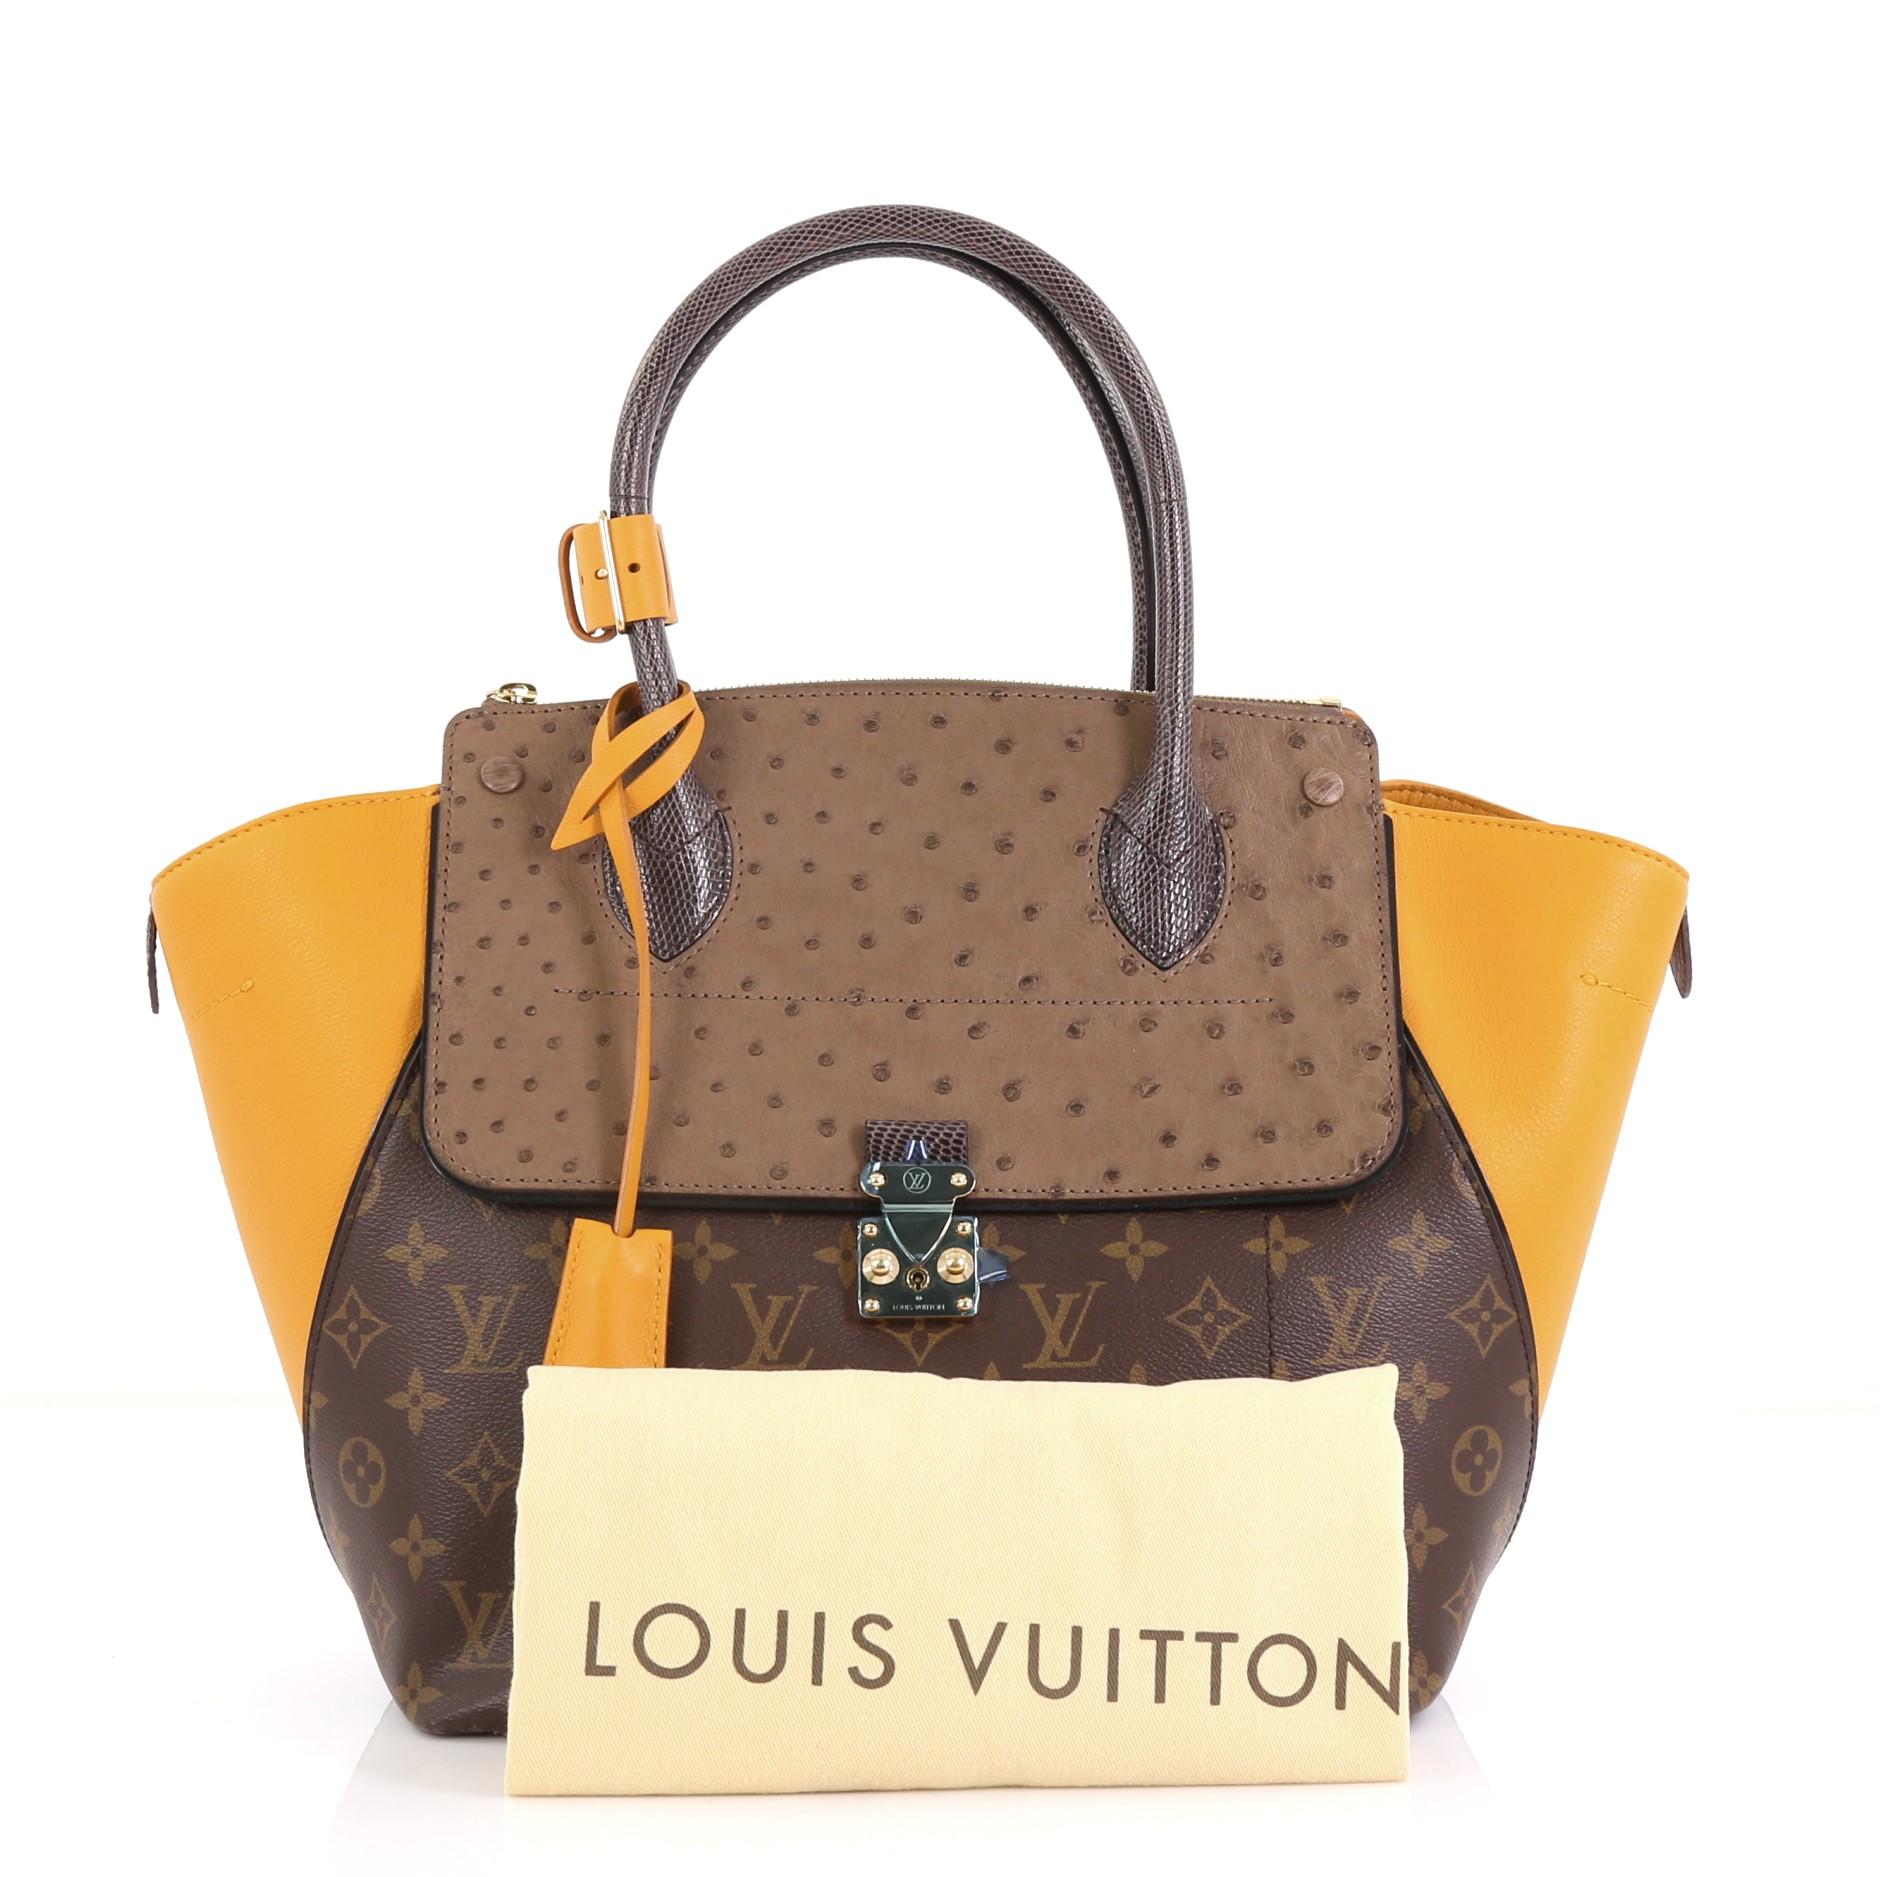 This Louis Vuitton Majestueux Tote Monogram Canvas and Exotics MM, crafted in brown monogram coated canvas and exotics, features an angular silhouette, dual rolled handles, protective base studs, and gold-tone hardware. Its S-lock and zip closures